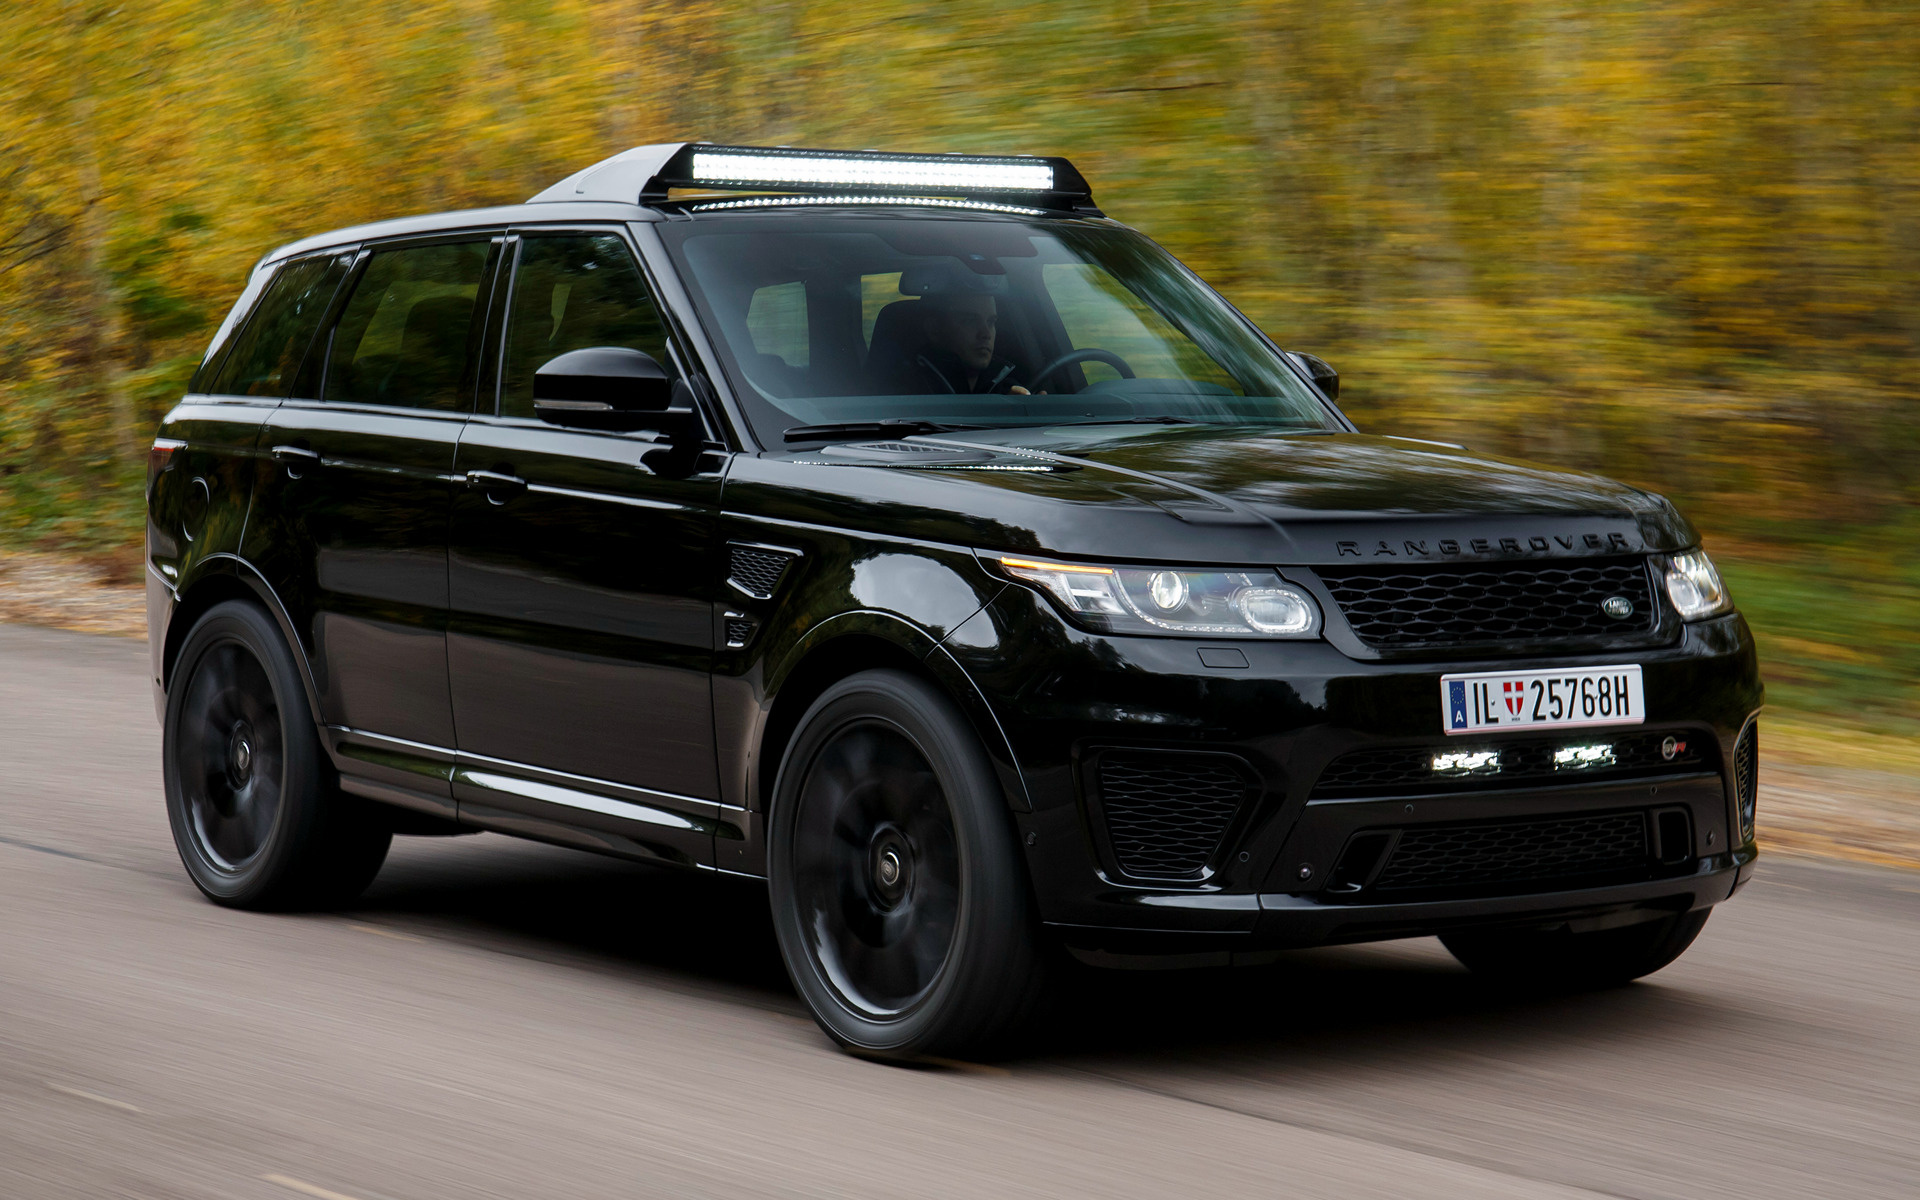 Range Rover Sport SVR 007 Spectre (2015) Wallpapers and HD Images